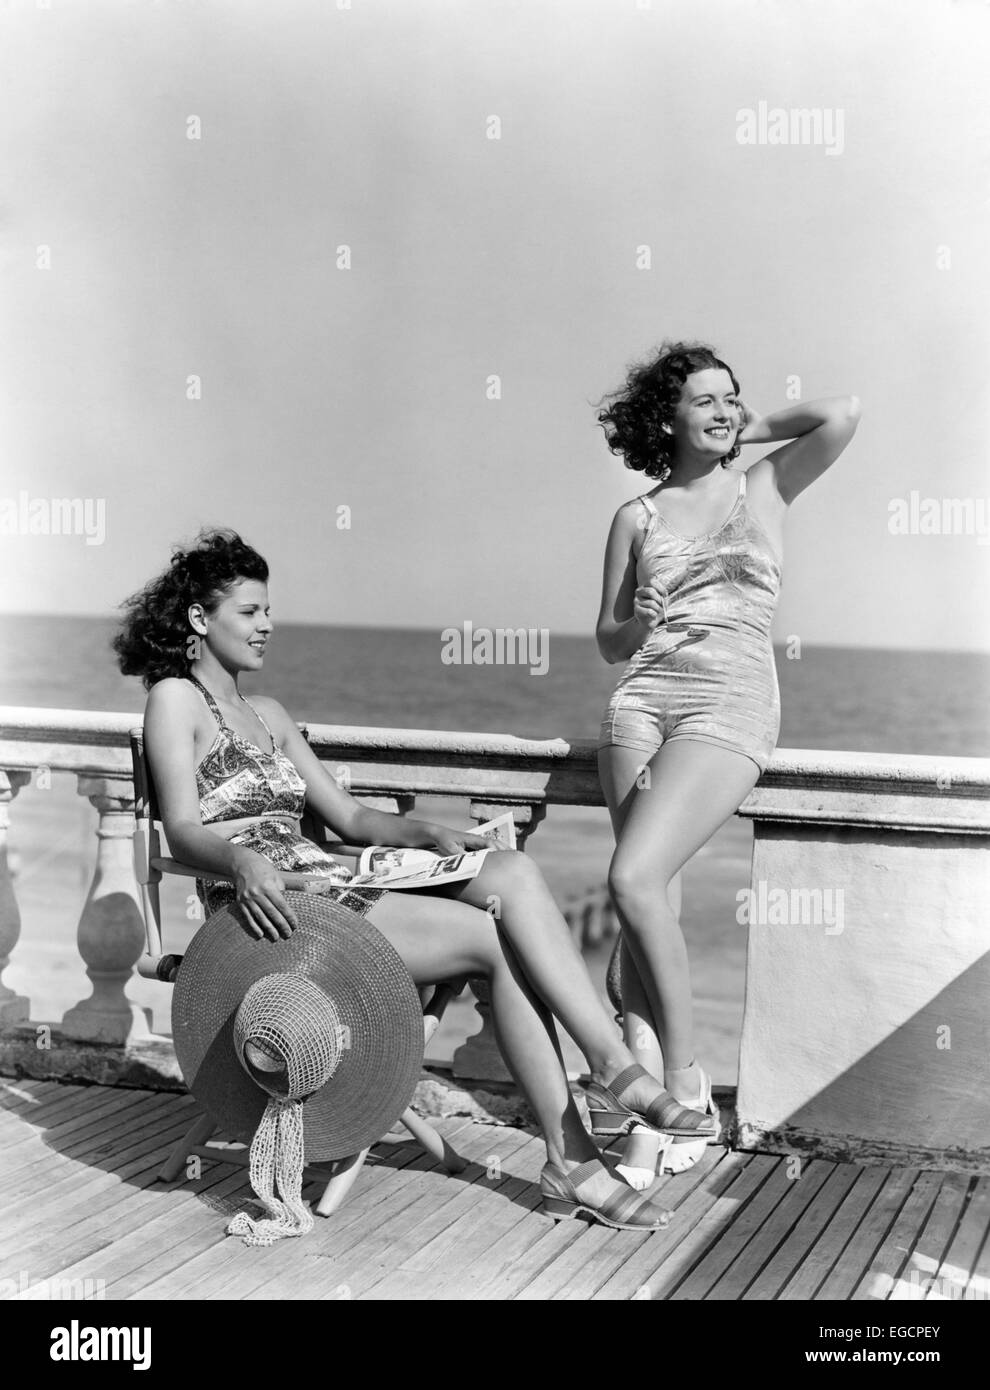 1930s 1940s TWO WOMEN SITTING ON HOTEL DECK BEACH SIDE IN ONE PIECE BATHING SUIT FASHION FLORIDA USA Stock Photo